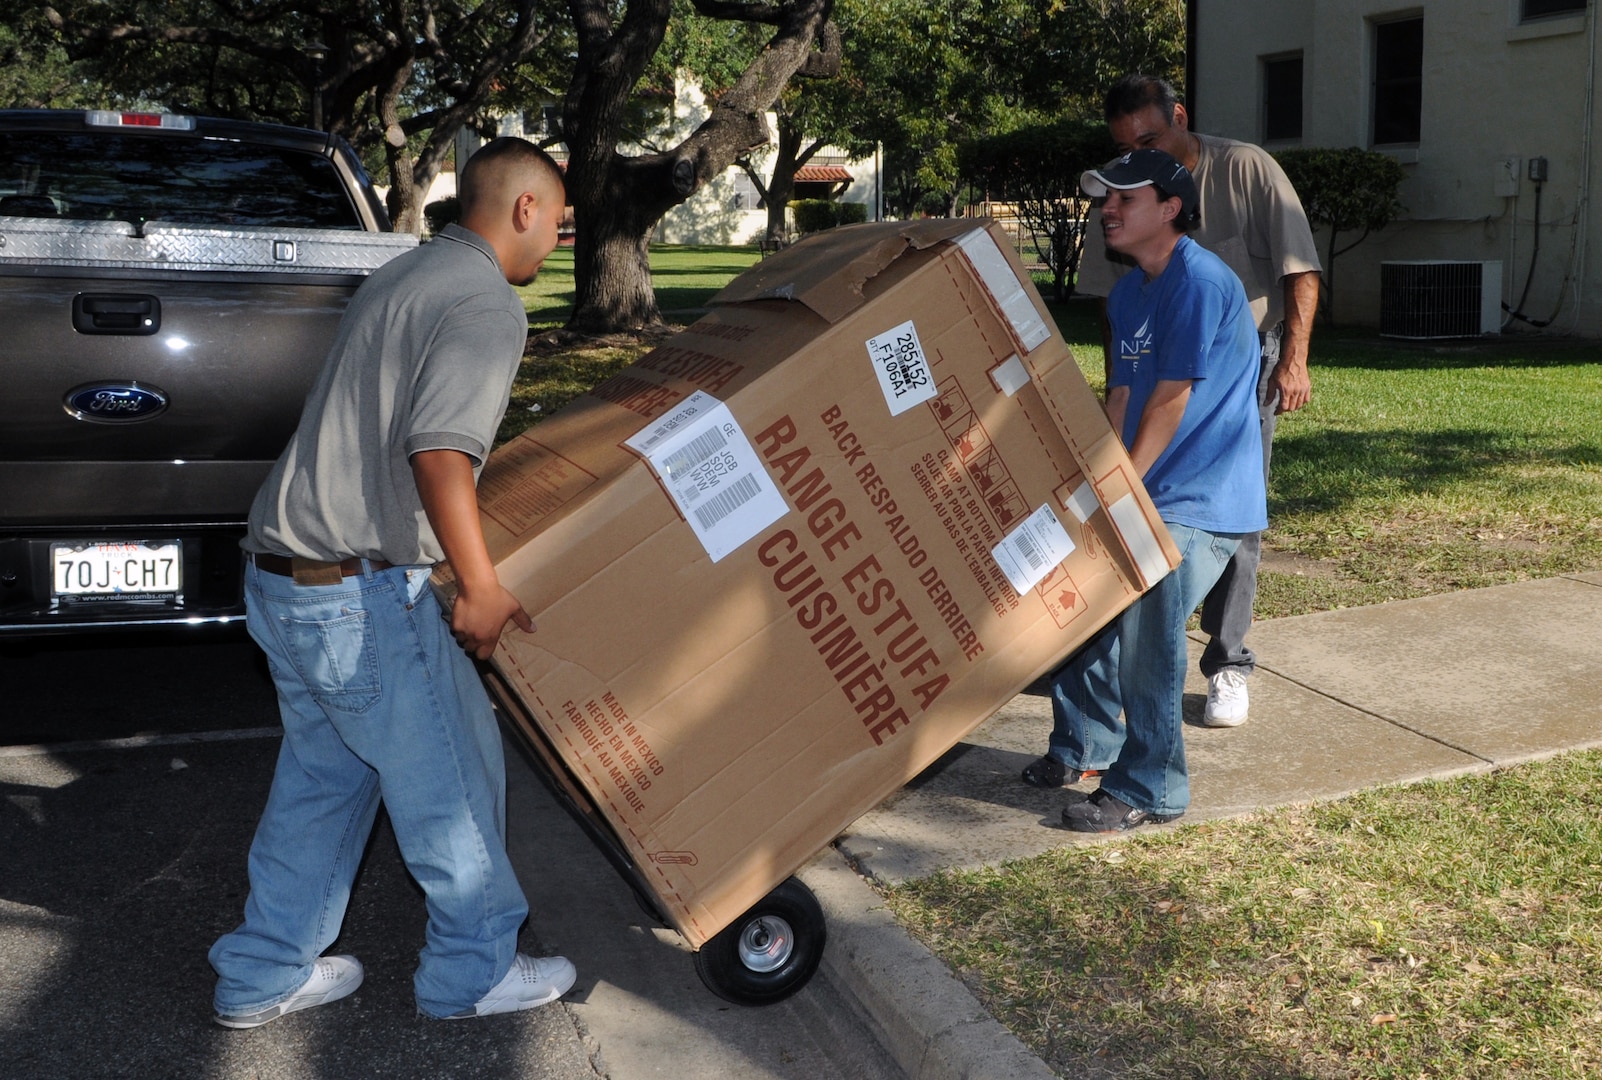 Tomas Amaya (left) and Juan Castillo move a stove into a base home Sept. 30. (U.S. Air Force photo by Rich McFadden)